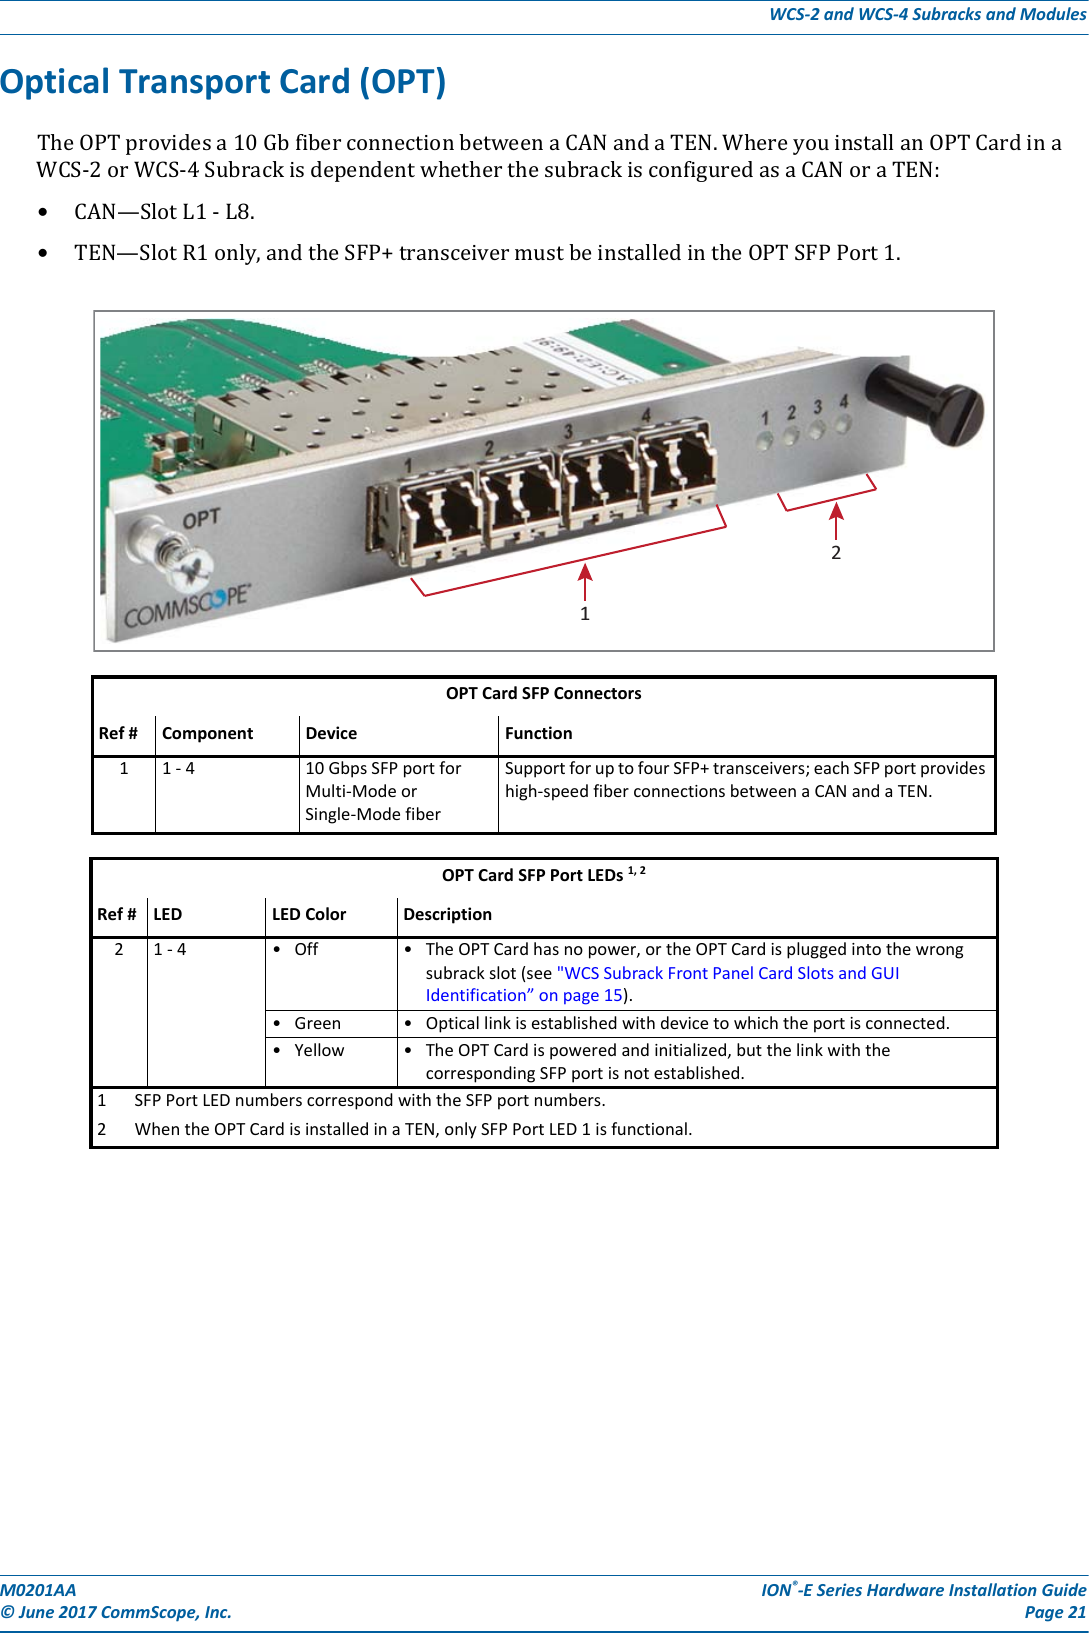 M0201AA ION®-E Series Hardware Installation Guide© June 2017 CommScope, Inc. Page 21WCS-2 and WCS-4 Subracks and ModulesOptical Transport Card (OPT)TheOPTprovidesa10GbfiberconnectionbetweenaCANandaTEN.WhereyouinstallanOPTCardinaWCS-2orWCS-4SubrackisdependentwhetherthesubrackisconfiguredasaCANoraTEN:•CAN—SlotL1-L8.•TEN—SlotR1only,andtheSFP+transceivermustbeinstalledintheOPTSFPPort1.OPT Card SFP ConnectorsRef # Component Device Function11 - 4 10 Gbps SFP port for Multi-Mode or Single-Mode fiberSupport for up to four SFP+ transceivers; each SFP port provides high-speed fiber connections between a CAN and a TEN. OPT Card SFP Port LEDs 1, 2Ref # LED LED Color Description21 - 4 • Off • The OPT Card has no power, or the OPT Card is plugged into the wrong subrack slot (see &quot;WCS Subrack Front Panel Card Slots and GUI Identification” on page 15).• Green • Optical link is established with device to which the port is connected.• Yellow • The OPT Card is powered and initialized, but the link with the corresponding SFP port is not established.1 SFP Port LED numbers correspond with the SFP port numbers.2 When the OPT Card is installed in a TEN, only SFP Port LED 1 is functional.12